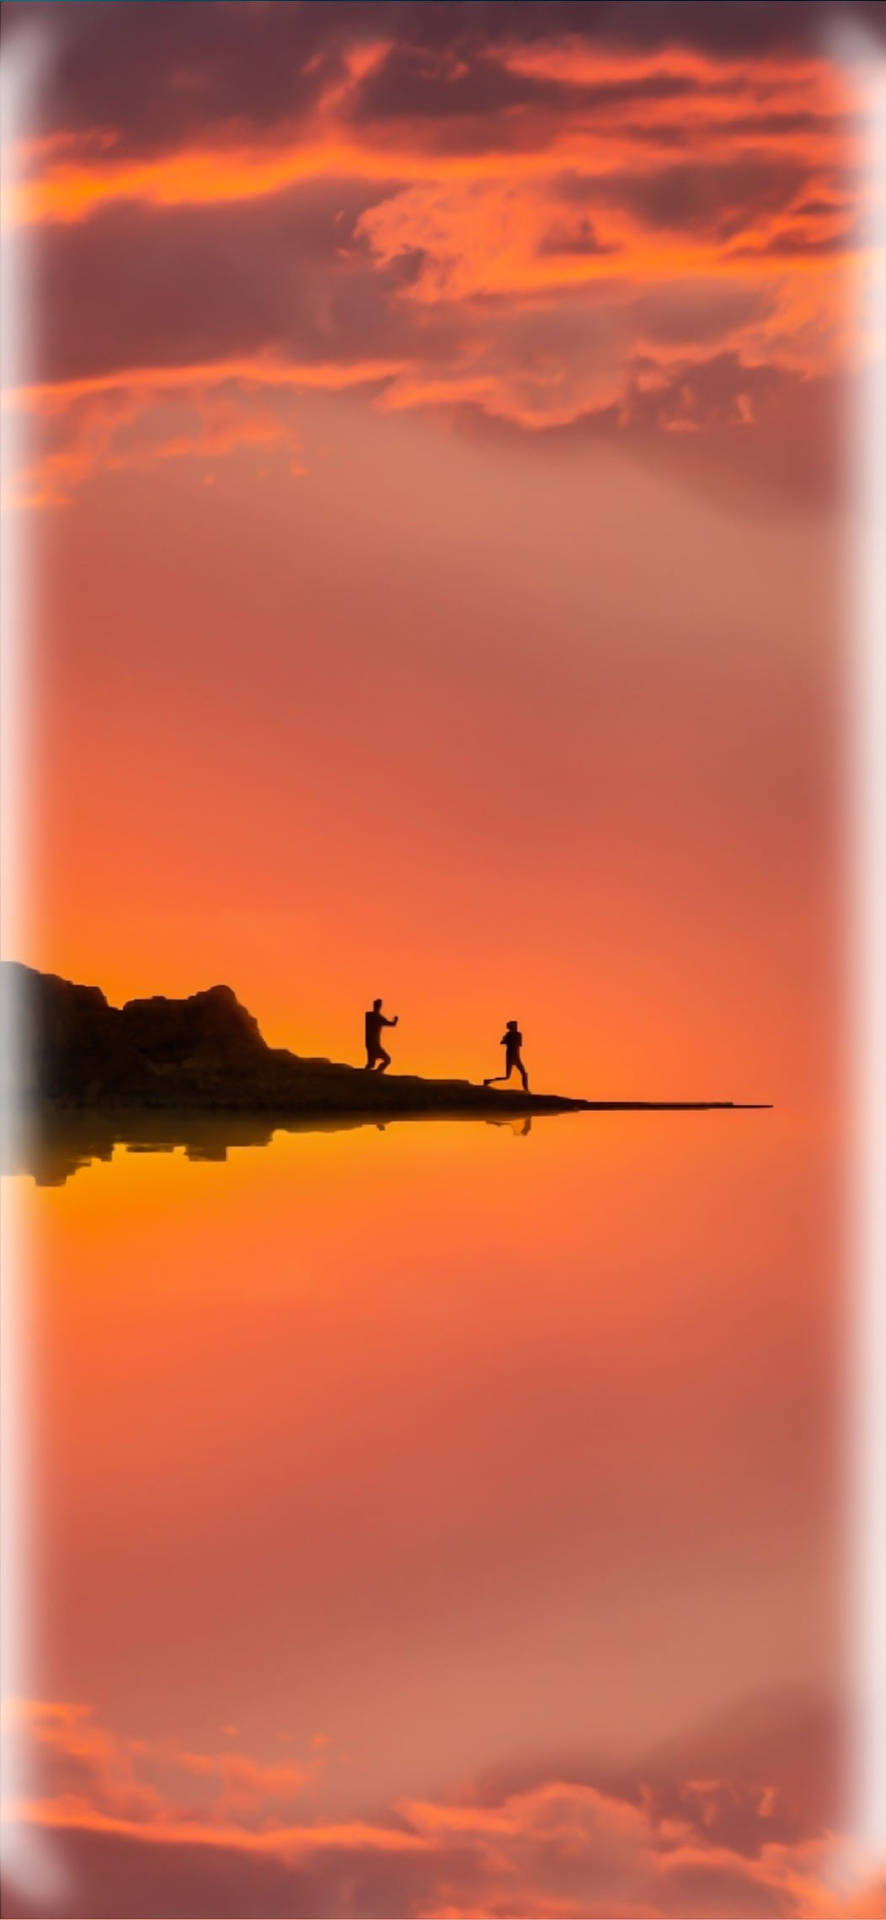 Caption: Romantic Sunset View On Samsung Full Hd Background